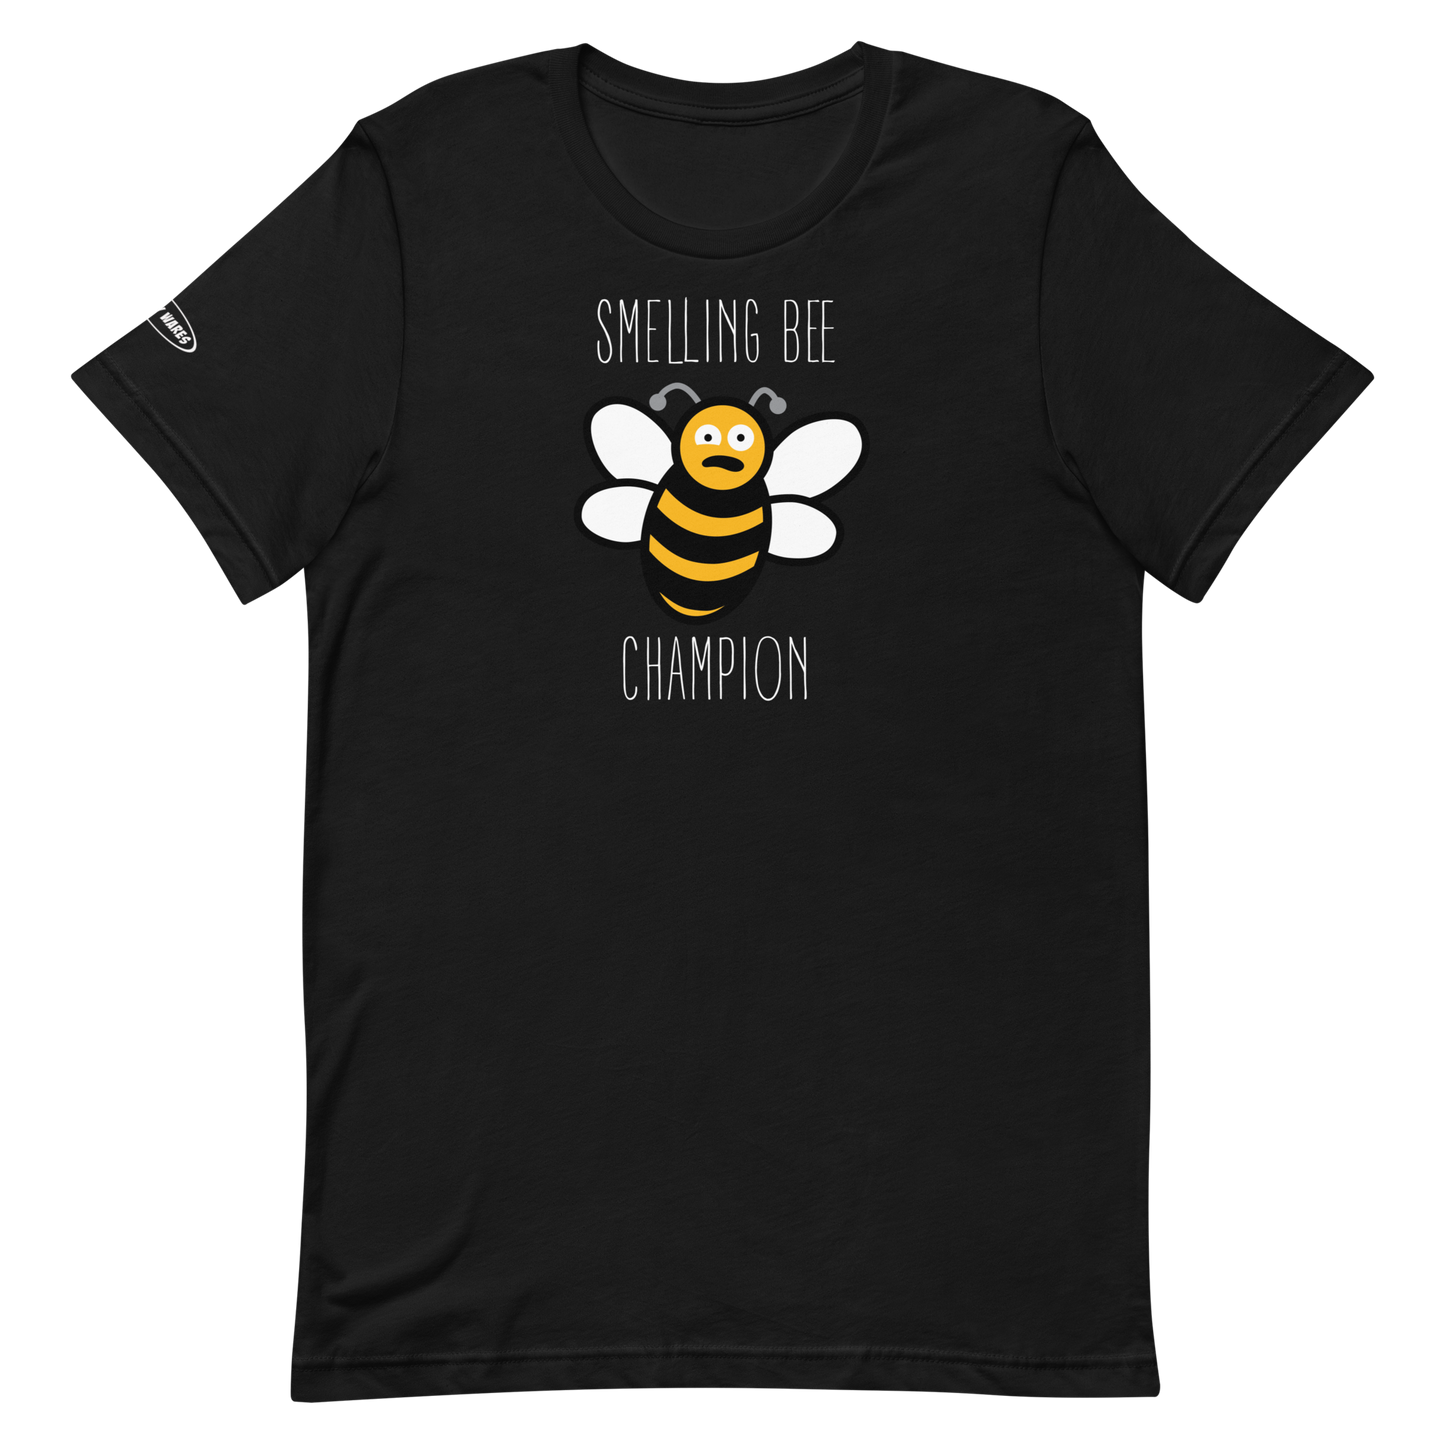 Smelling Bee Champion